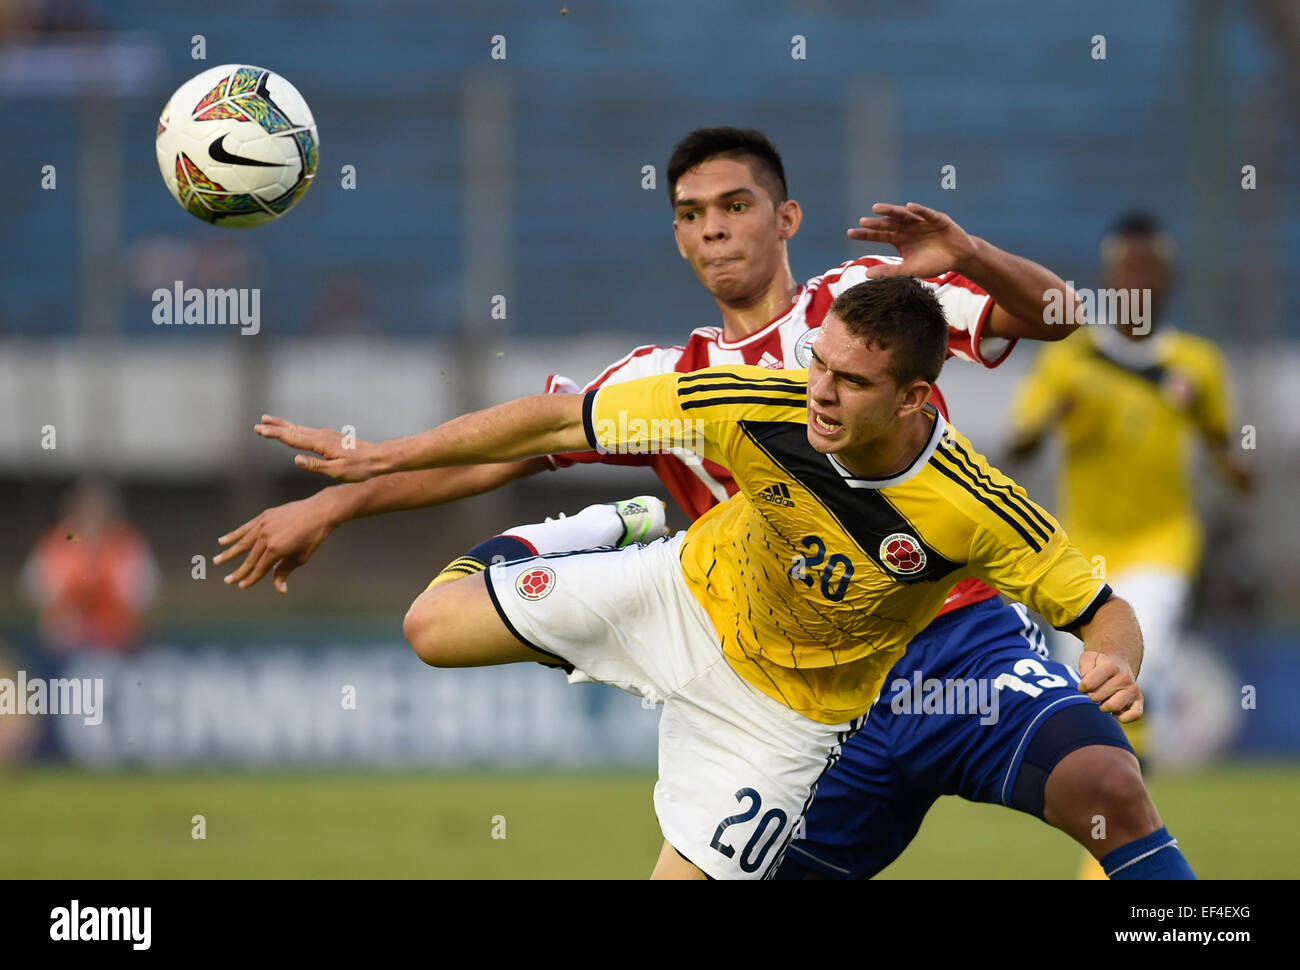 Montevideo, Uruguay. 26th Jan, 2015. Paraguay's Omar Alderete (Rear), vies with Colombia's Rafael Borre in a match of the South American U-20 tournament in the Centenario Stadium, in Montevideo, capital of Uruguay, on Jan. 26, 2015. © Nicolas Celaya/Xinhua/Alamy Live News Stock Photo